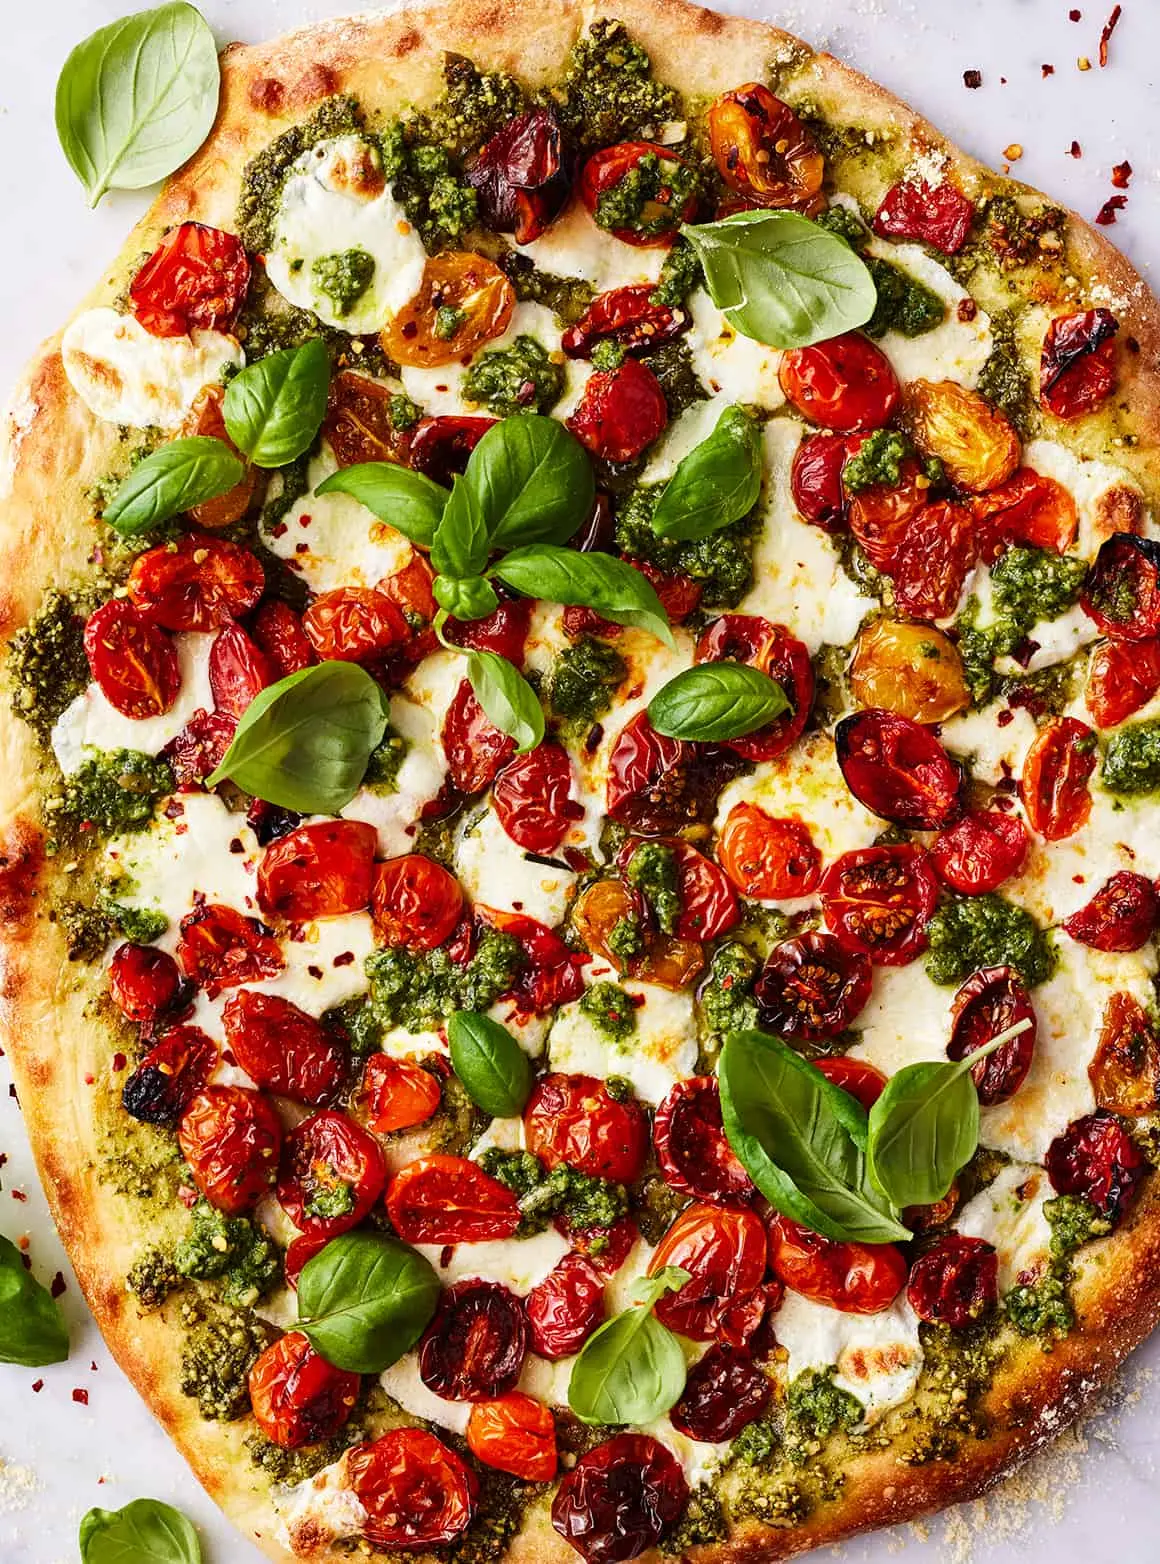 pizza with pesto sauce - What cheese goes with pesto